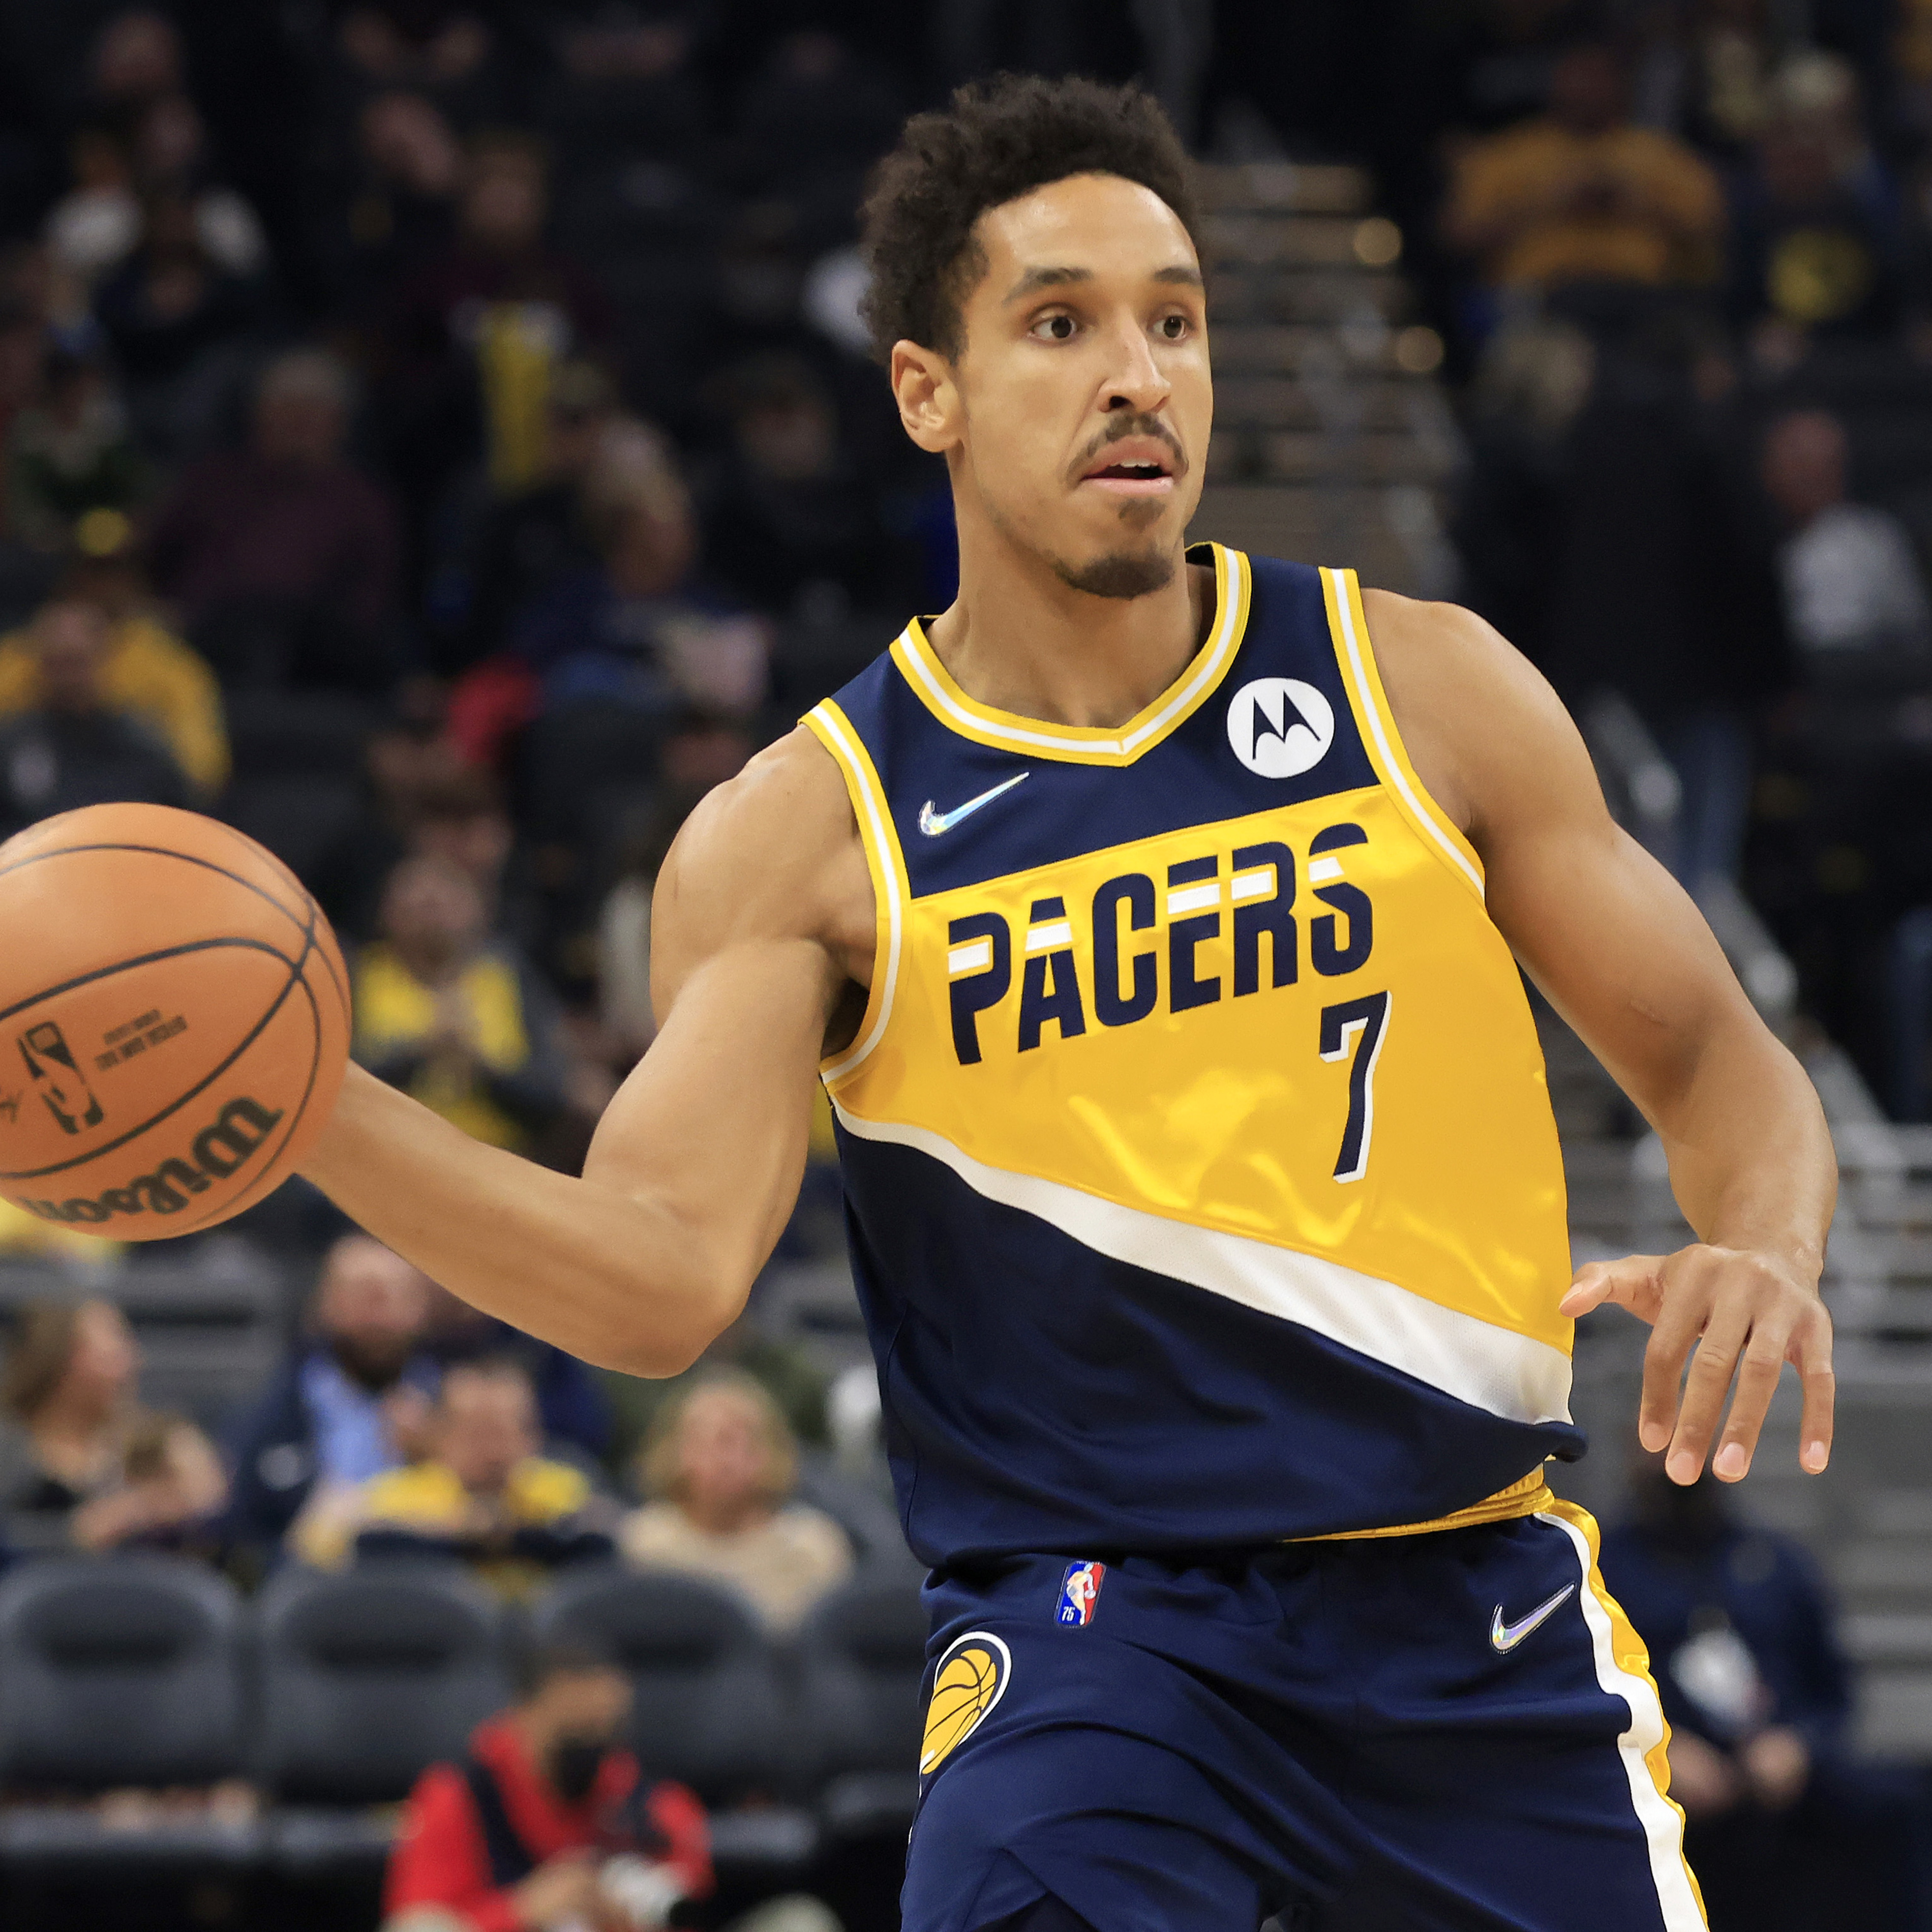 Celtics’, Pacers’ Updated Rosters, Payrolls, Draft Picks After Malcolm Brogdon Trade